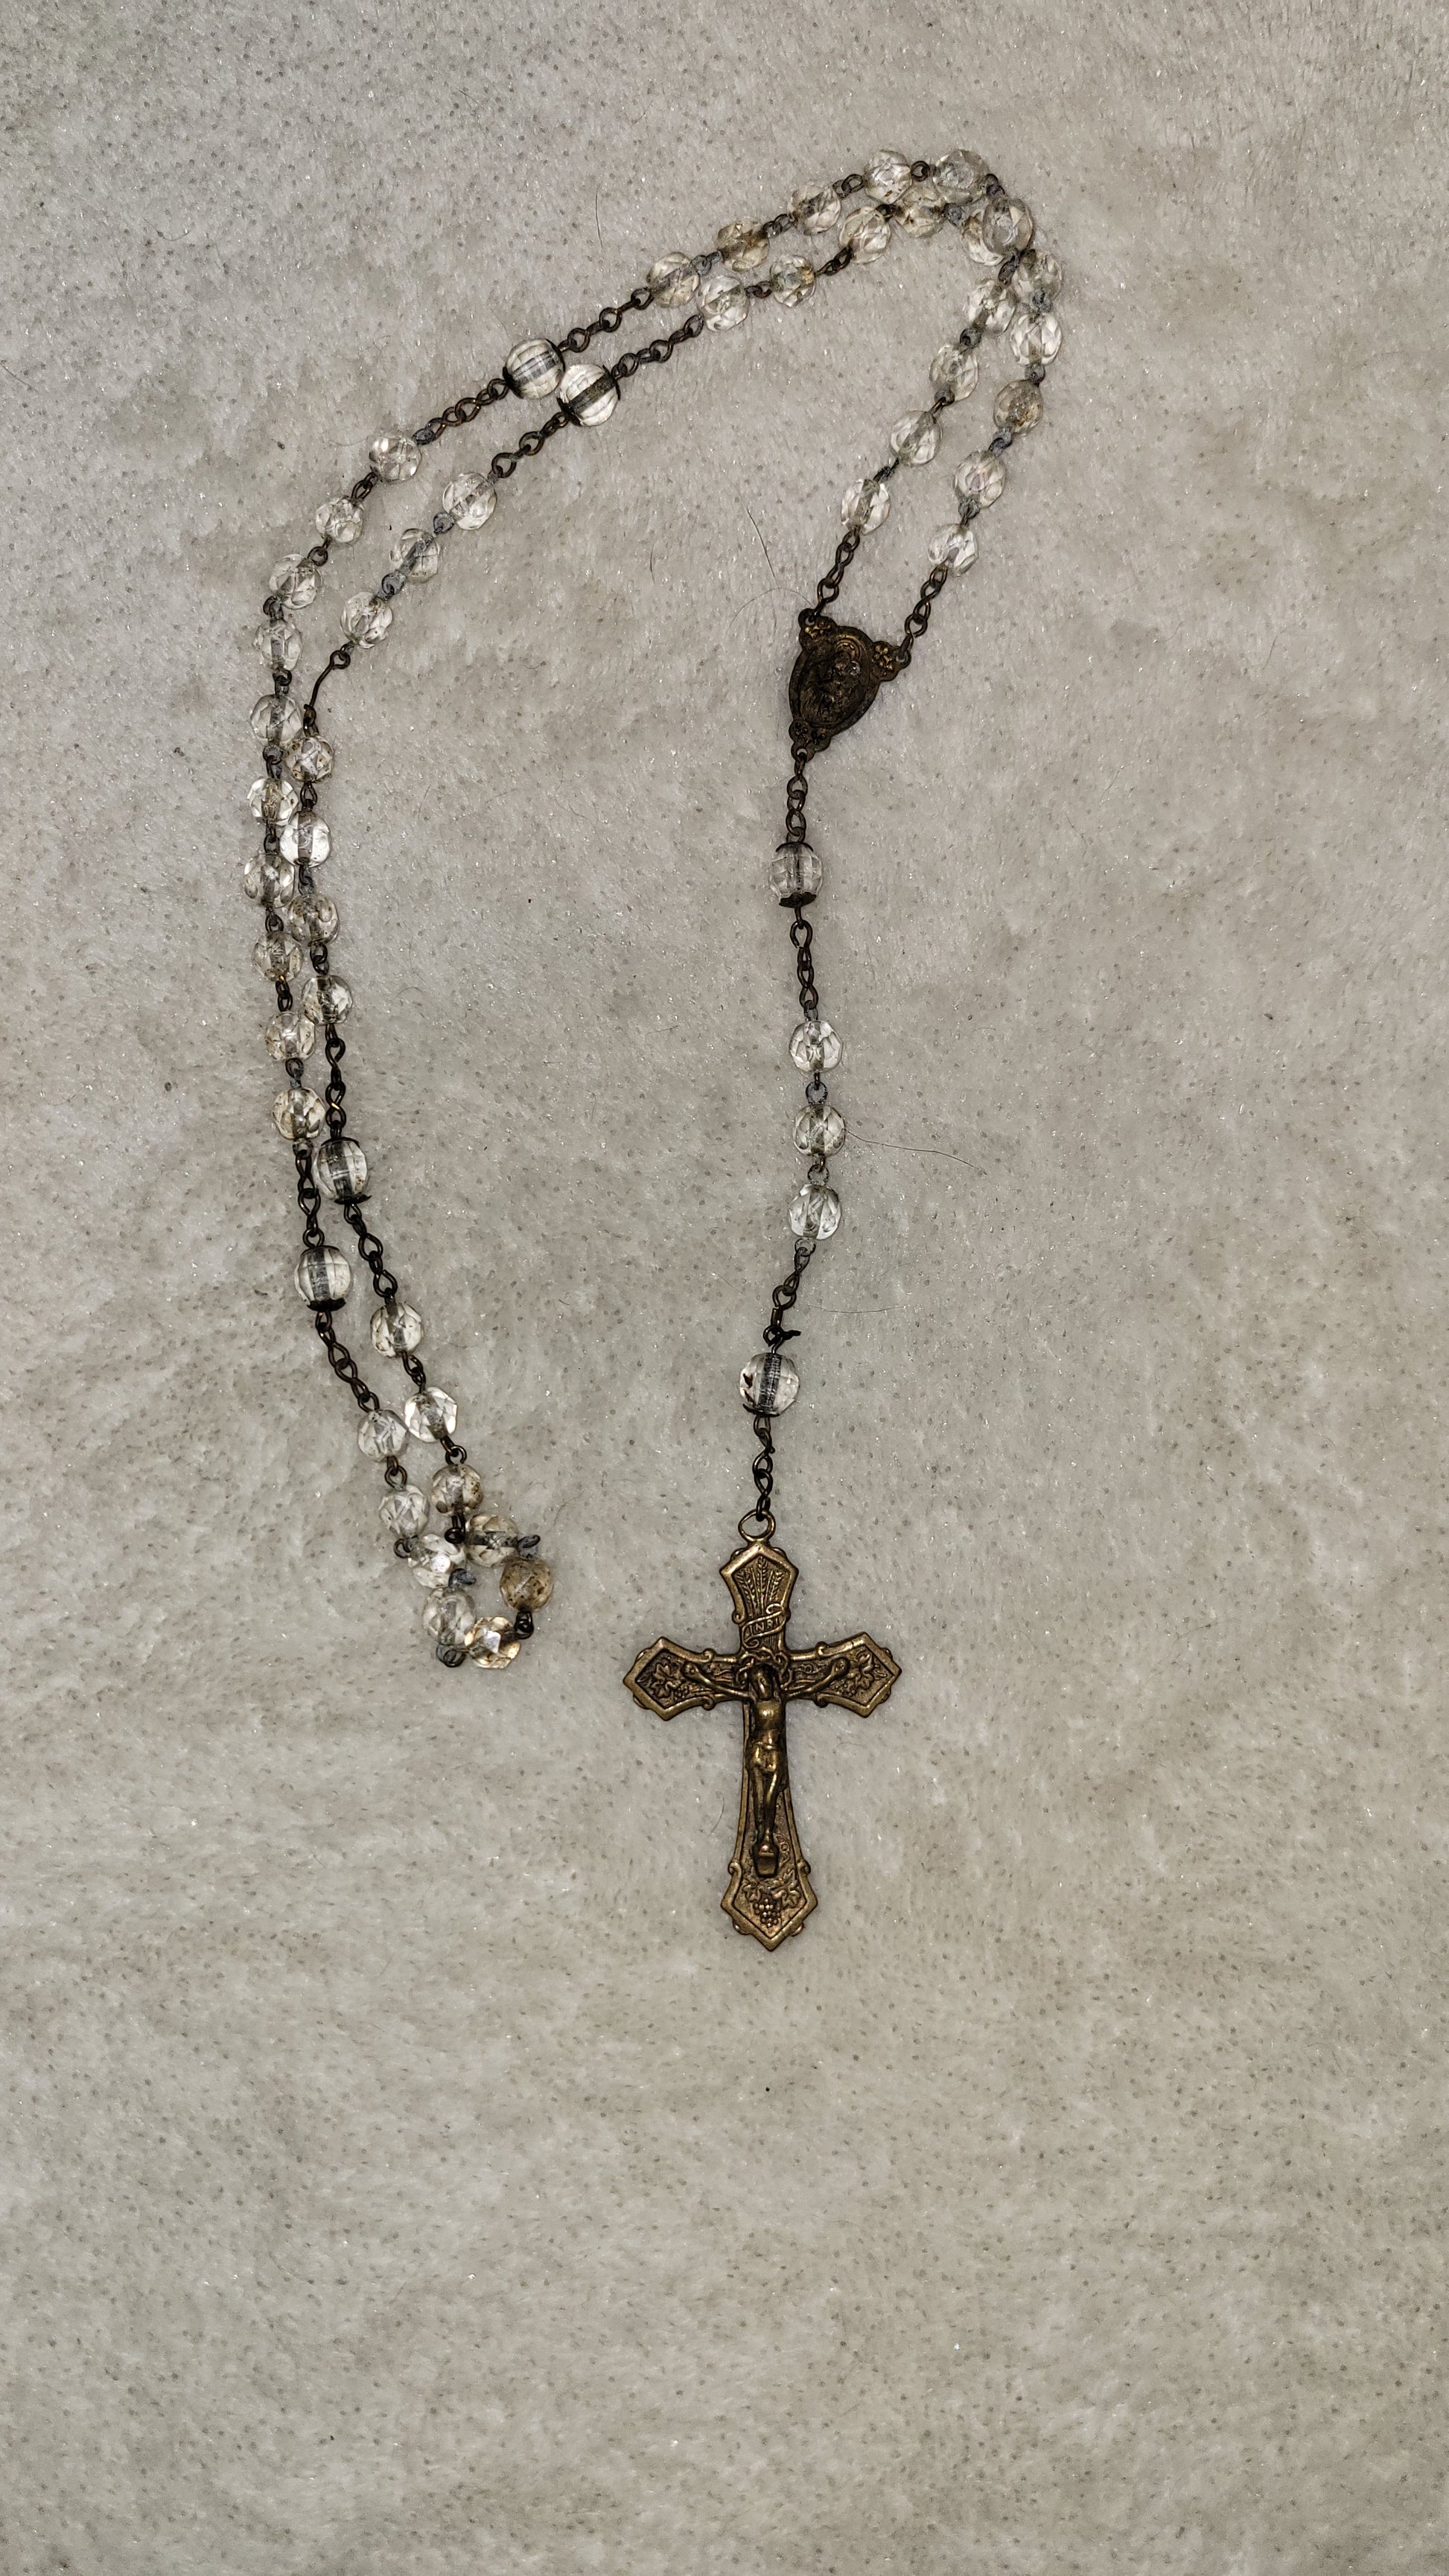 Christian Catholic rosary with crucifix and clear beads.  Overall view.